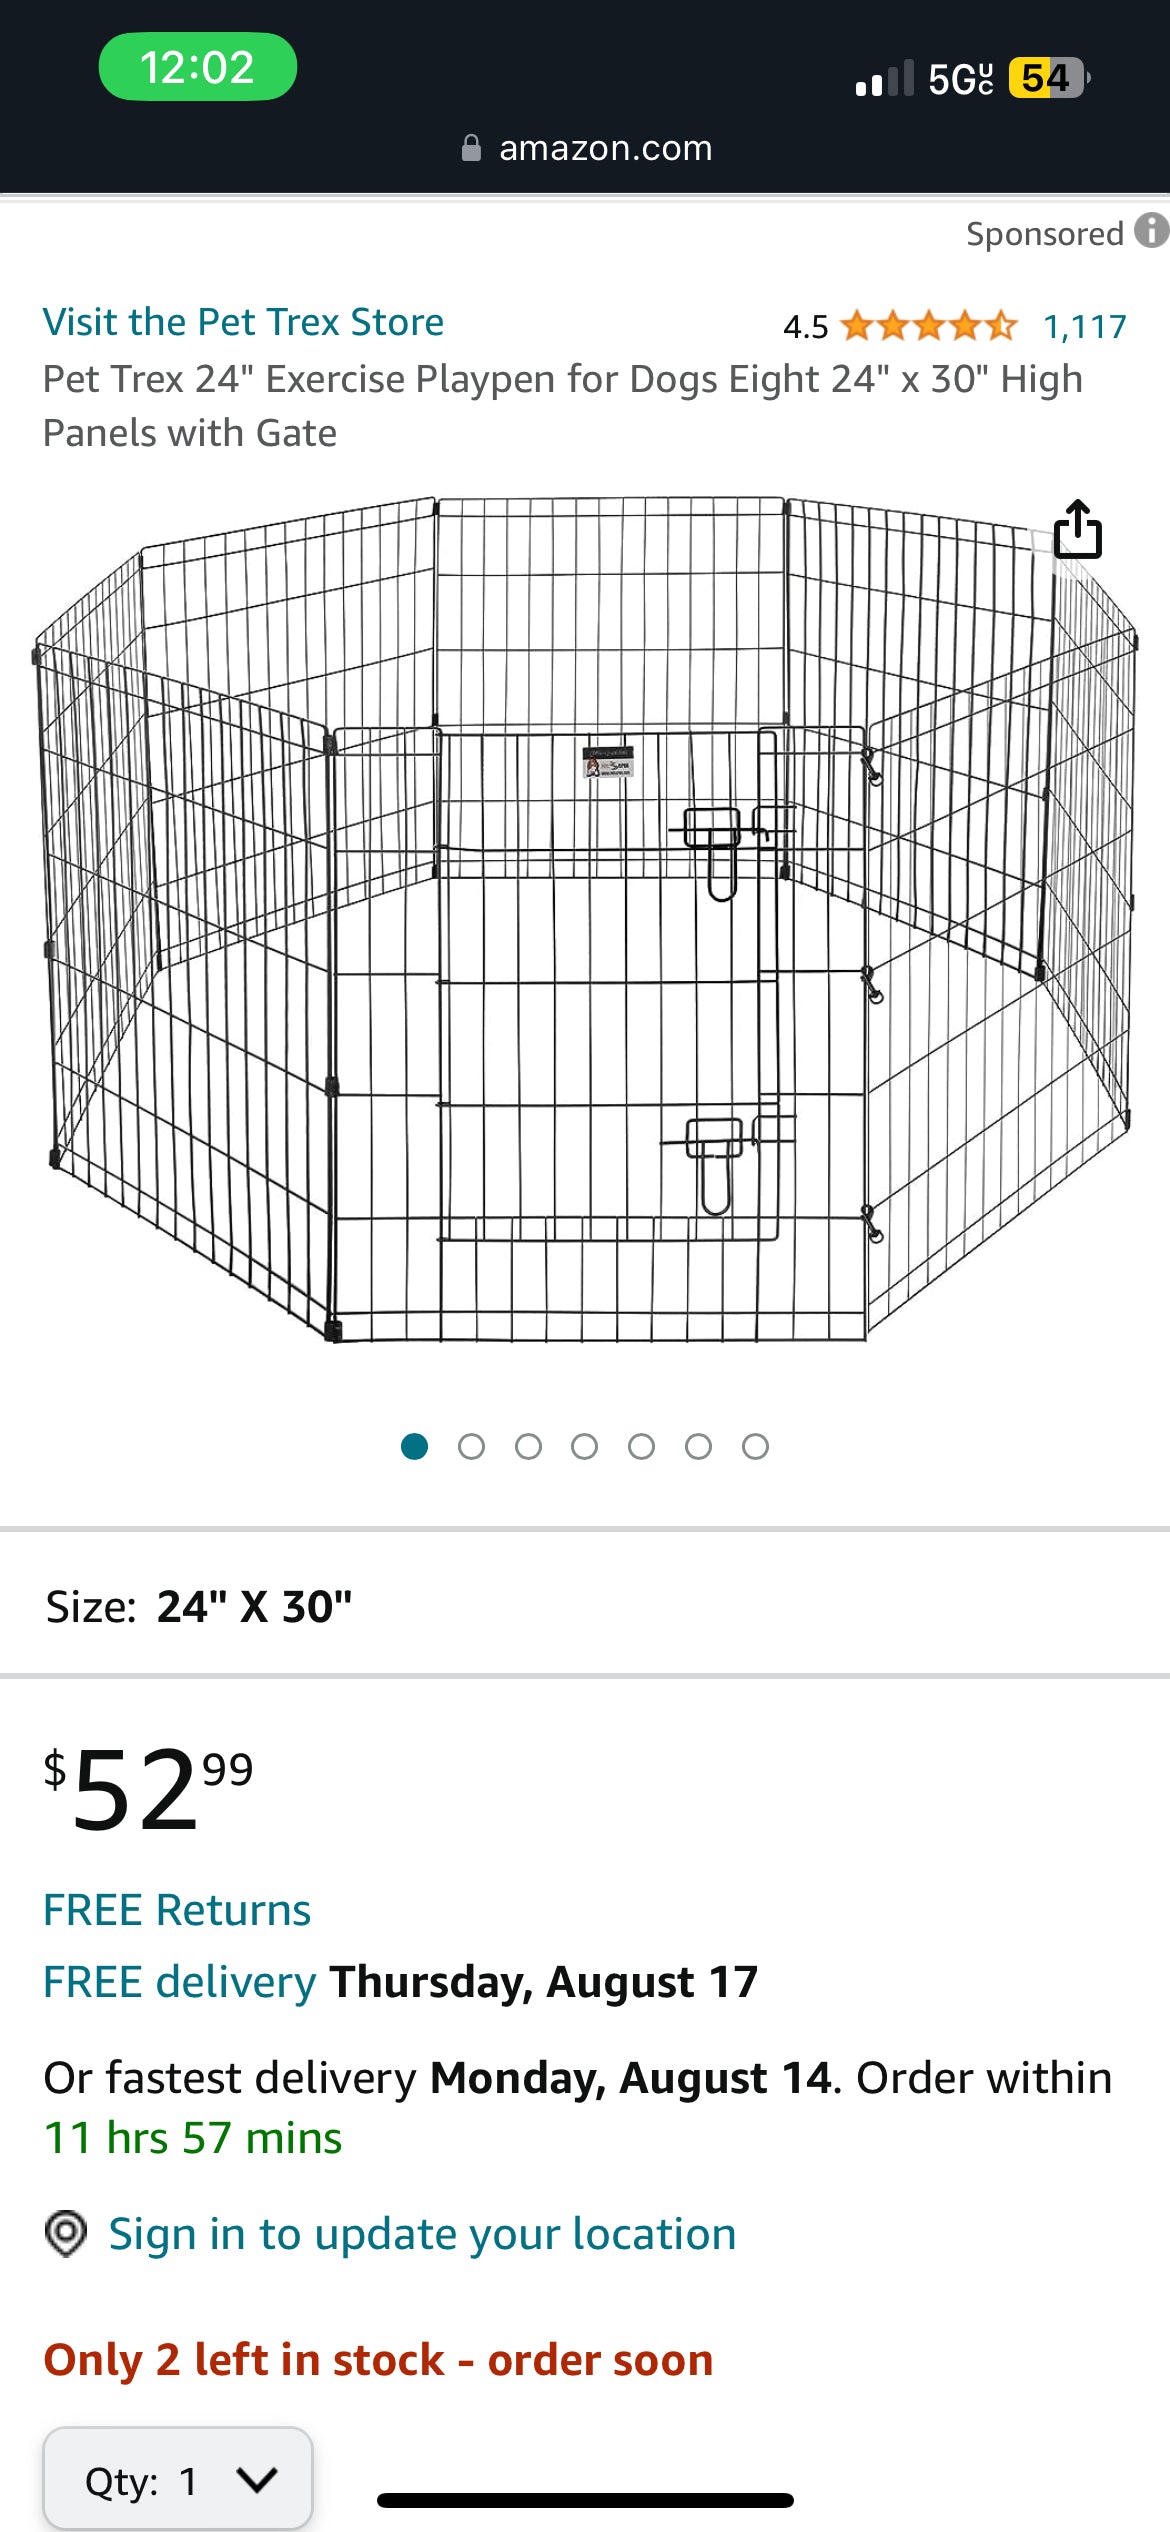 Pet Trex 24" Exercise Playpen for Dogs Eight 24" x 30" High Panels with Gate